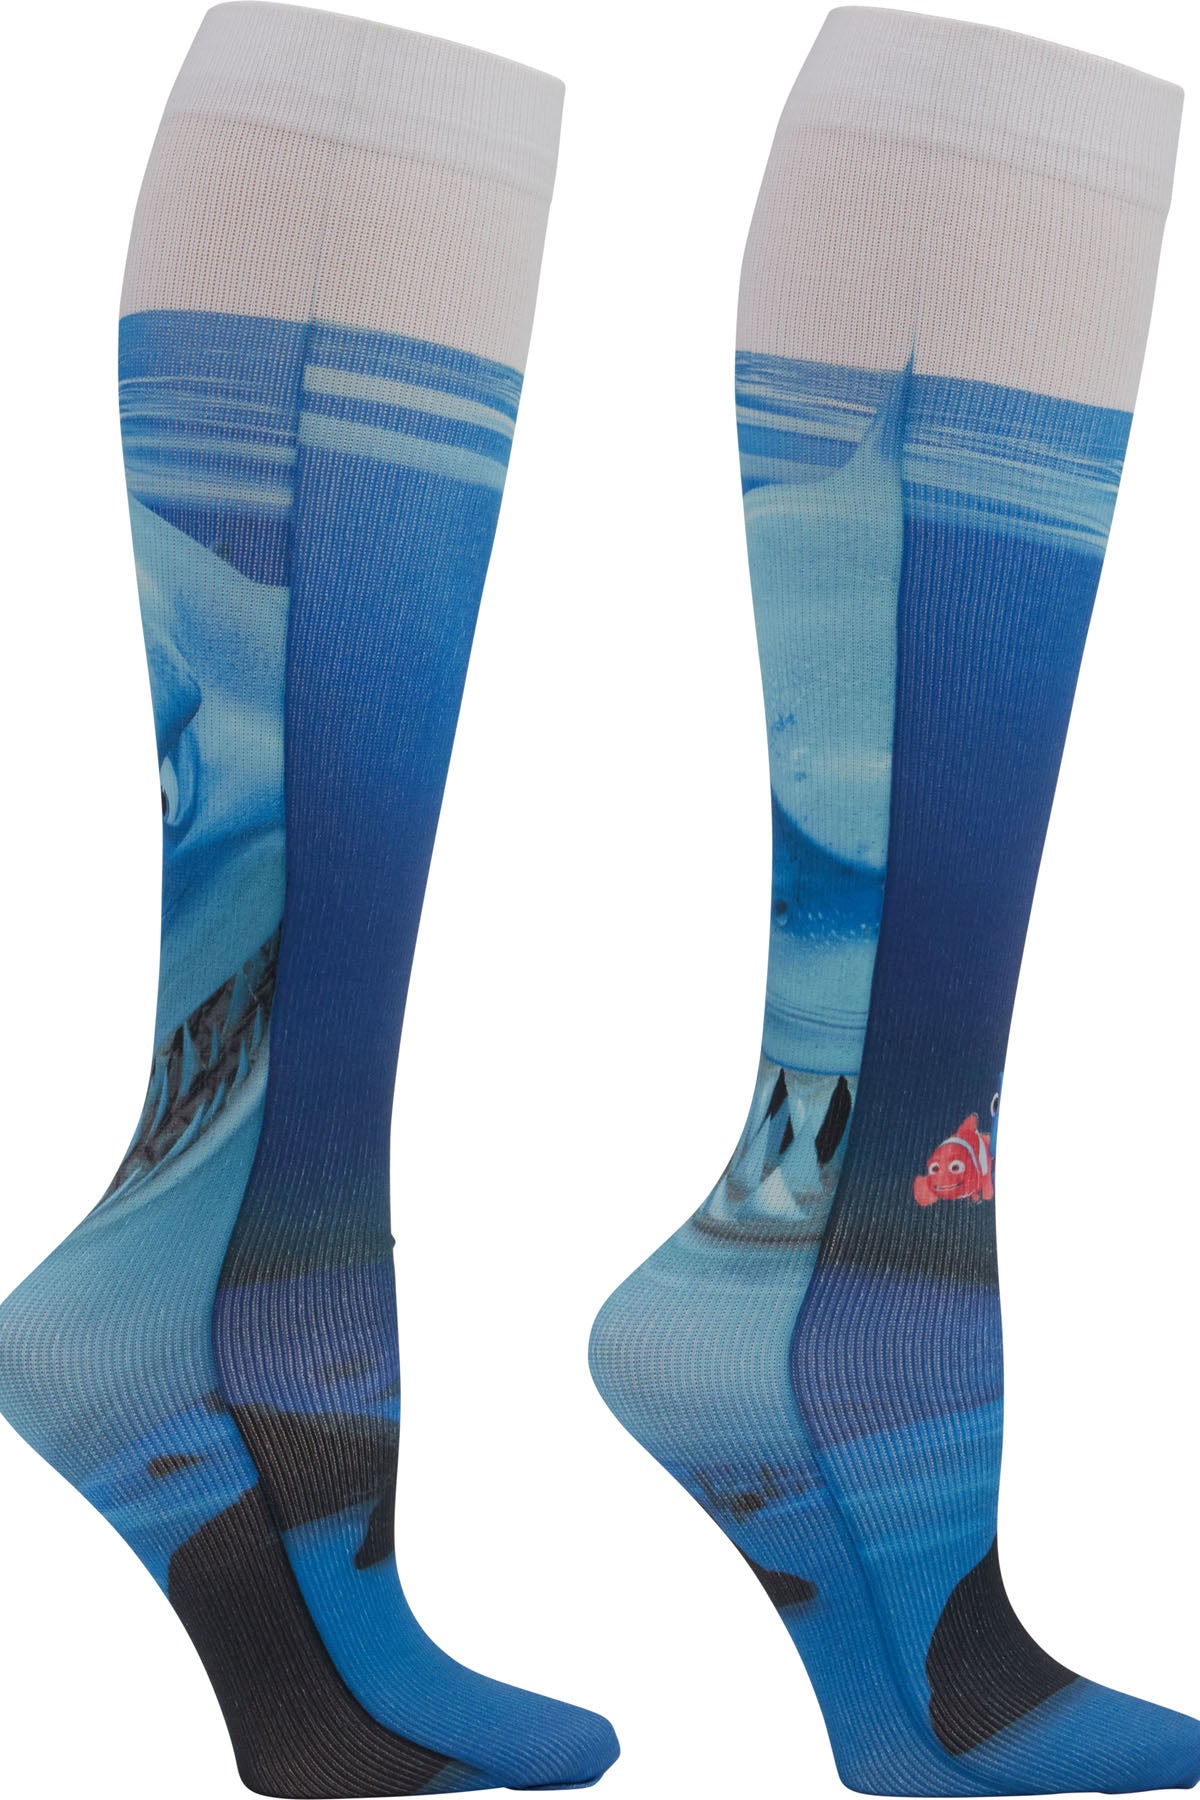 Cherokee Mild Compression Socks Comfort Support 8-15 mmHg in Chomp Chomp Pattern at Parker's Clothing and Shoes.